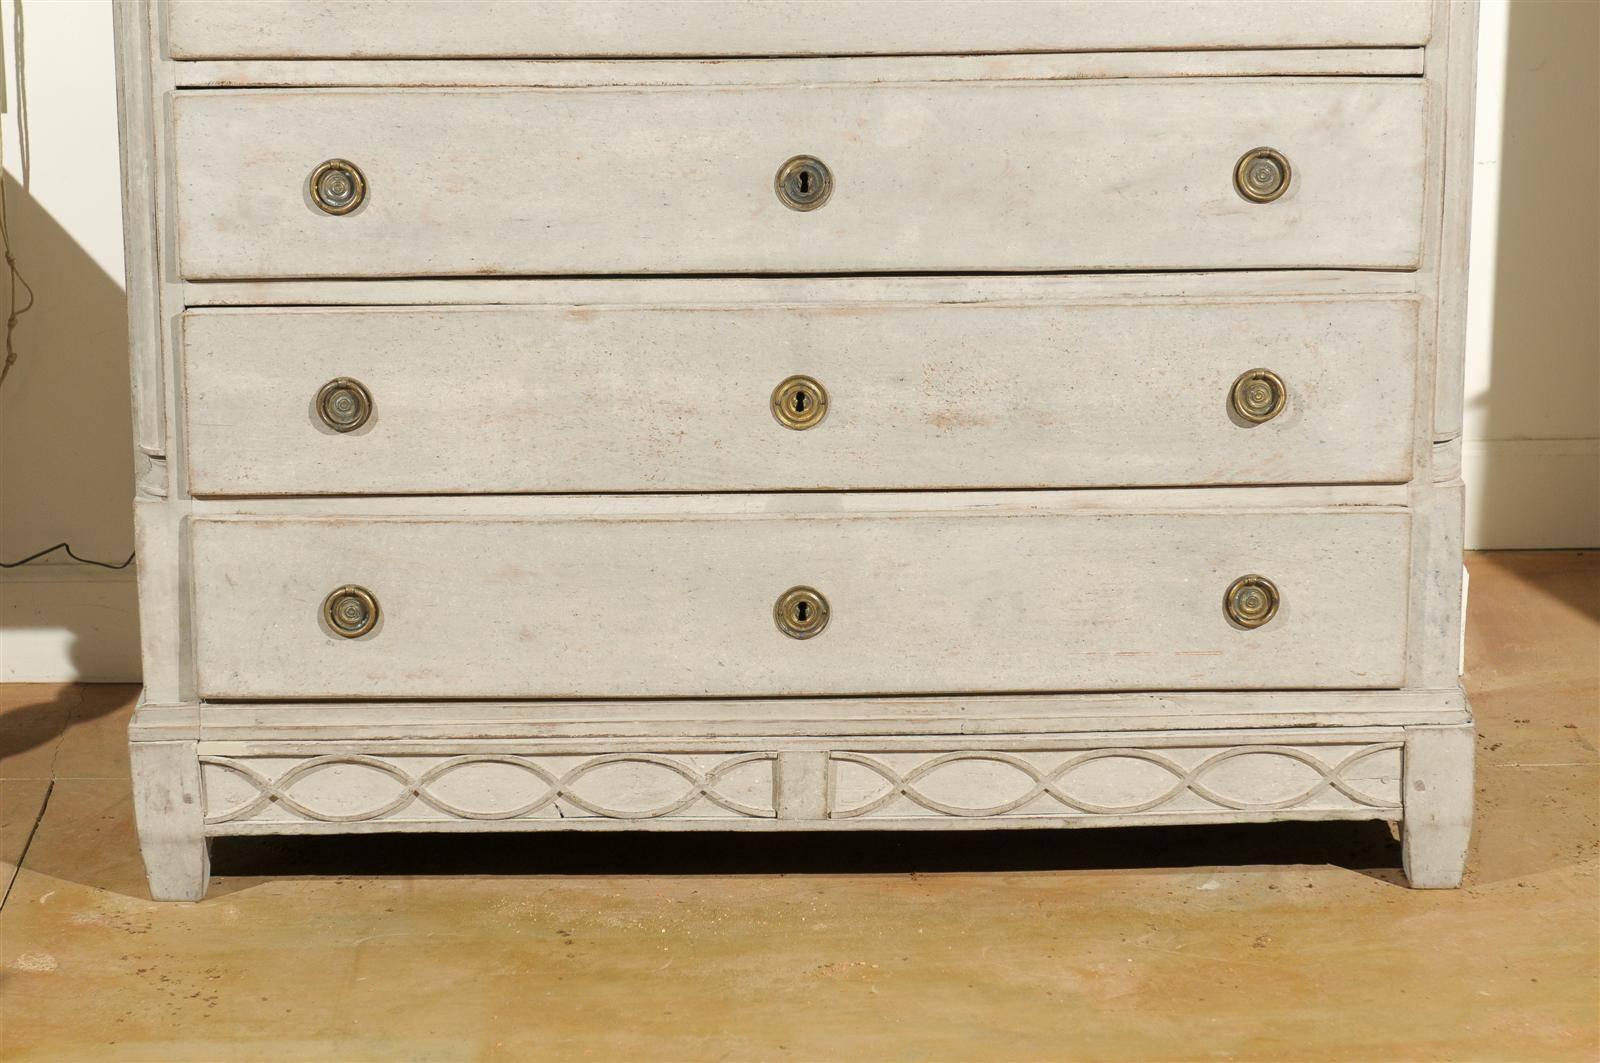 A Swedish Neoclassical painted wood five-drawer commode with swag décor from the early 19th century. This Swedish painted chest features a rectangular top sitting above a narrow frieze drawer followed by four larger dovetailed ones. If it weren't